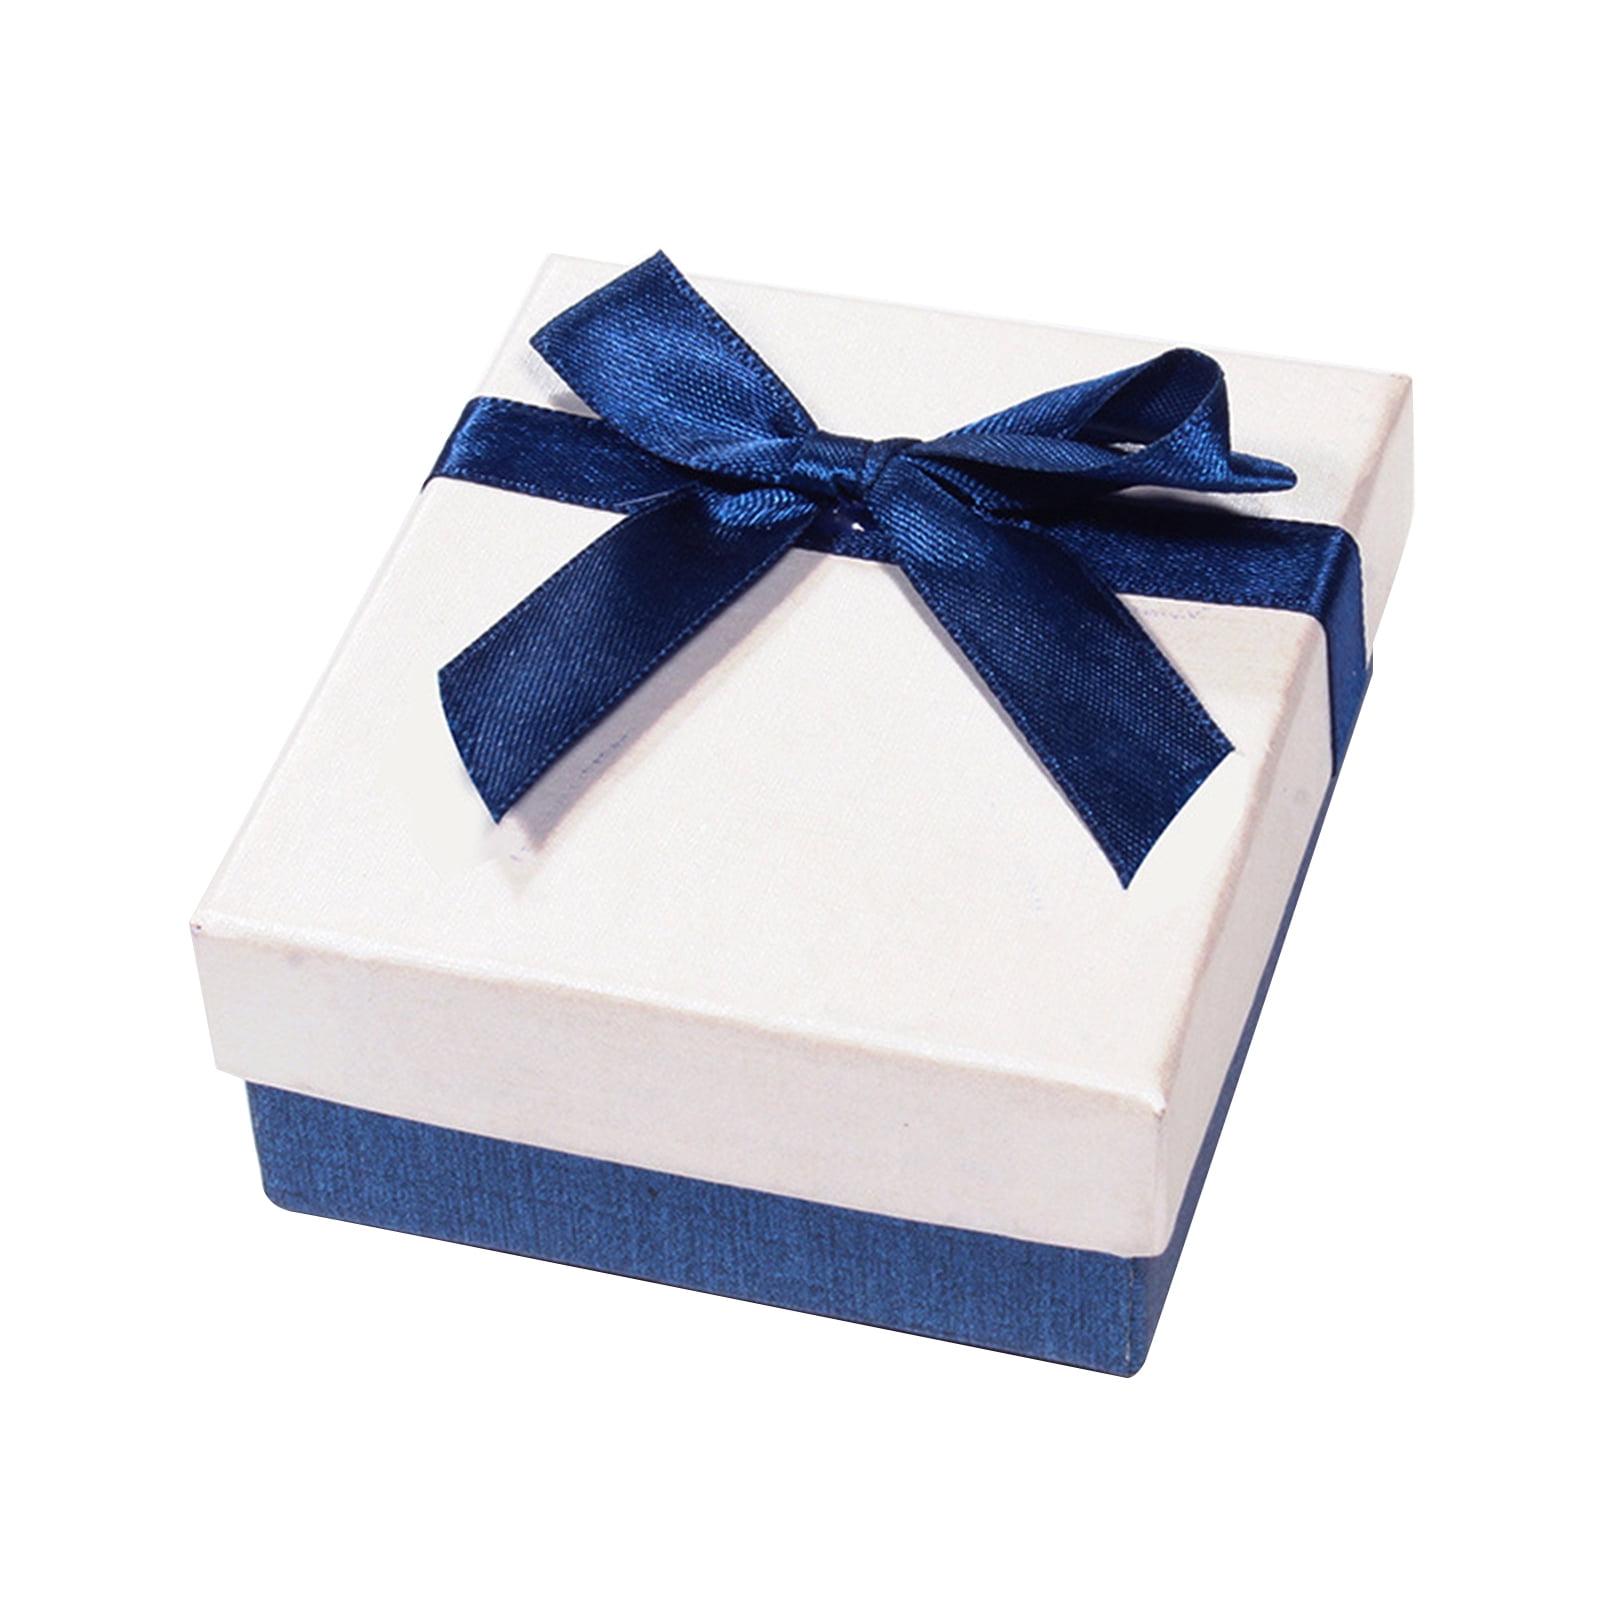 10 pcs Gift Boxes Bowknot Small Delicate Square Cube Ring Box for Birthday 